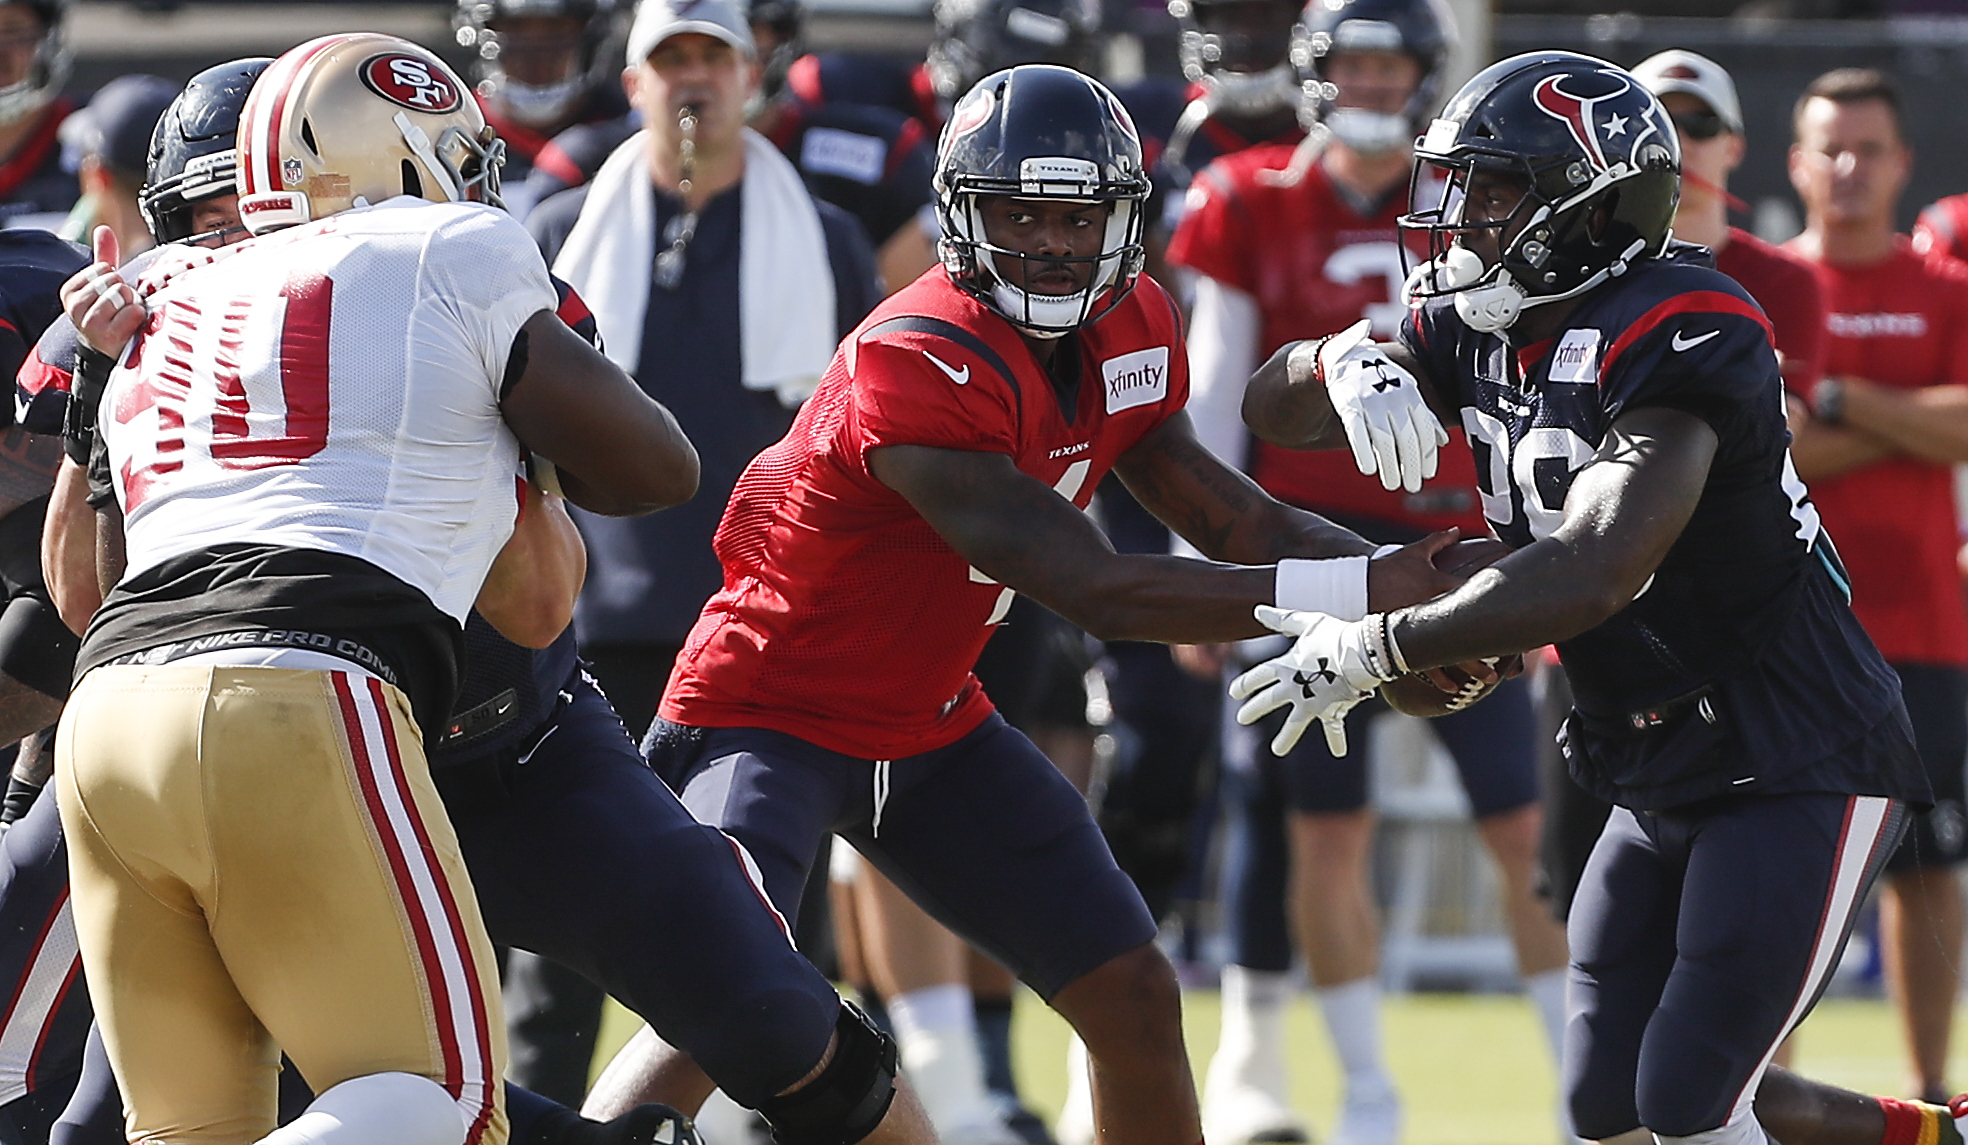 Aug. 15 Texans49ers joint practice